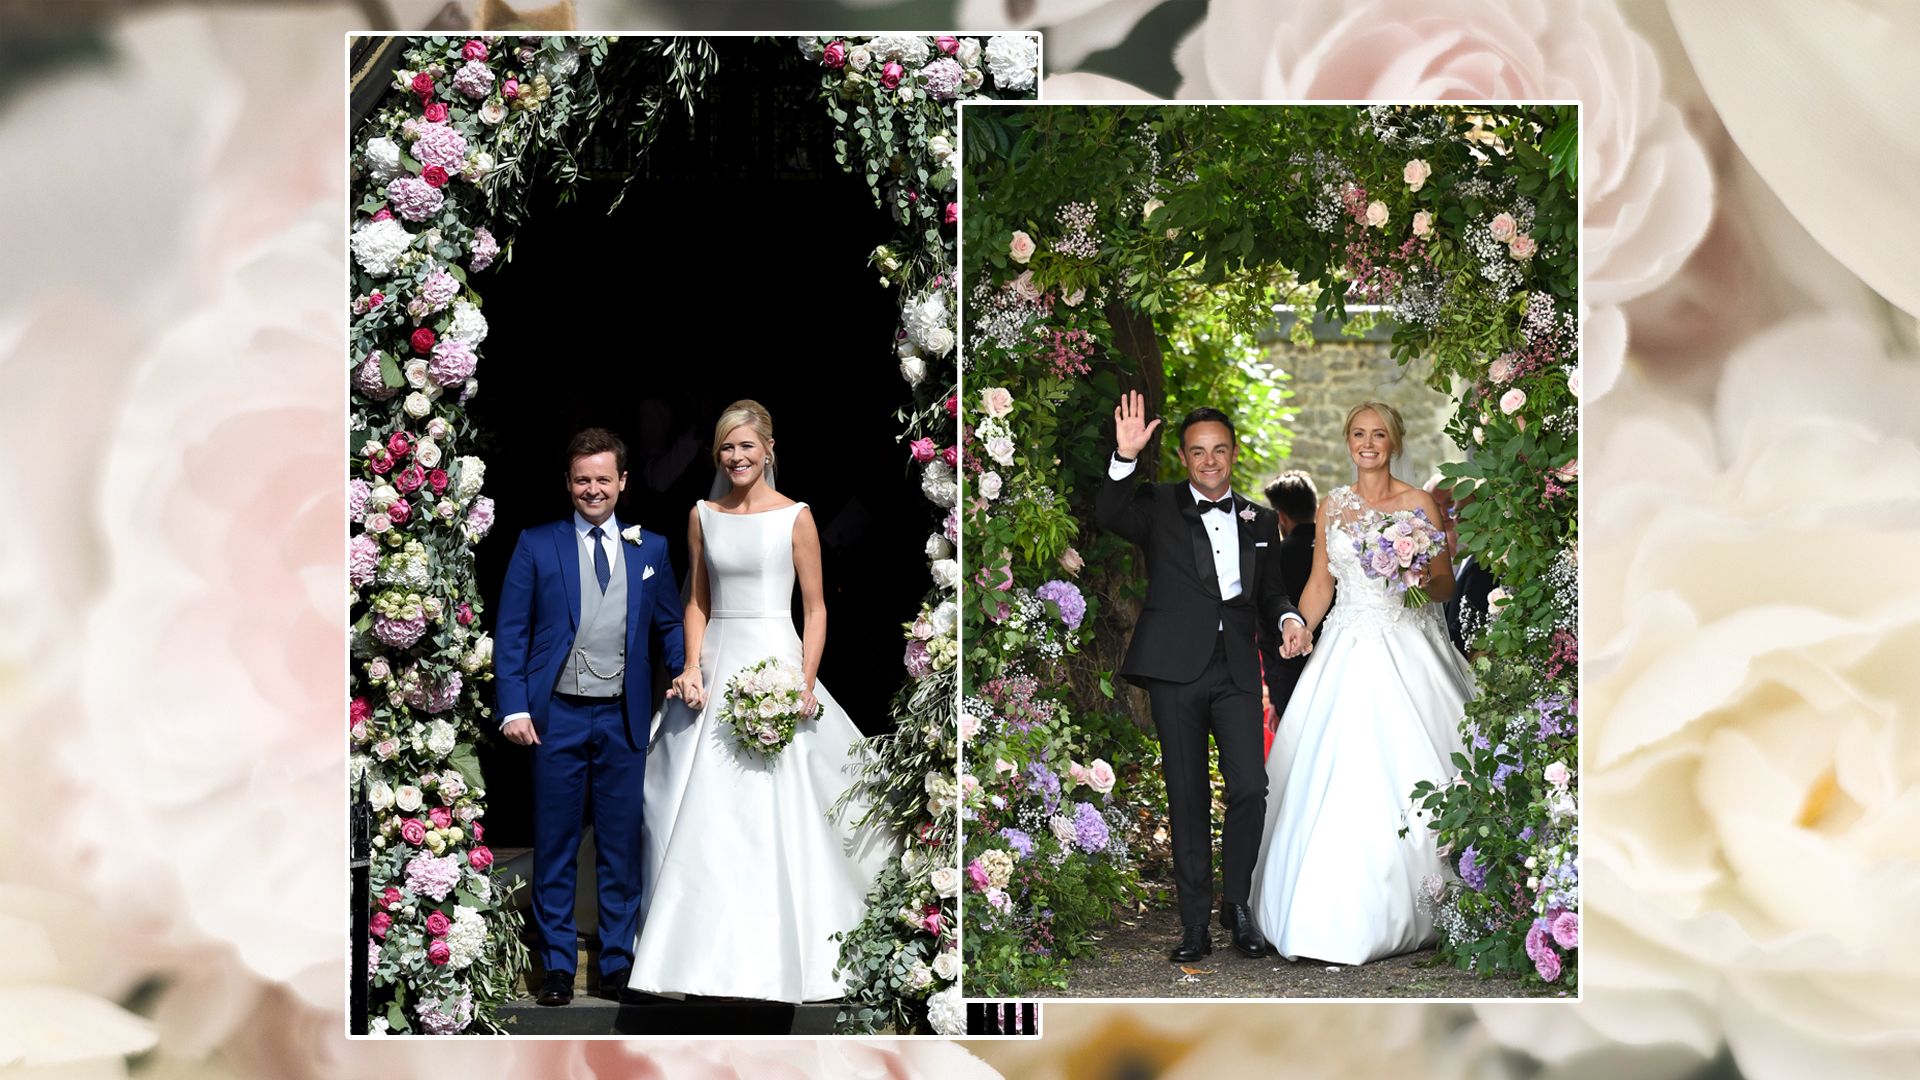 Ant McPartlin and Declan Donnelly's weddings were uncannily similar